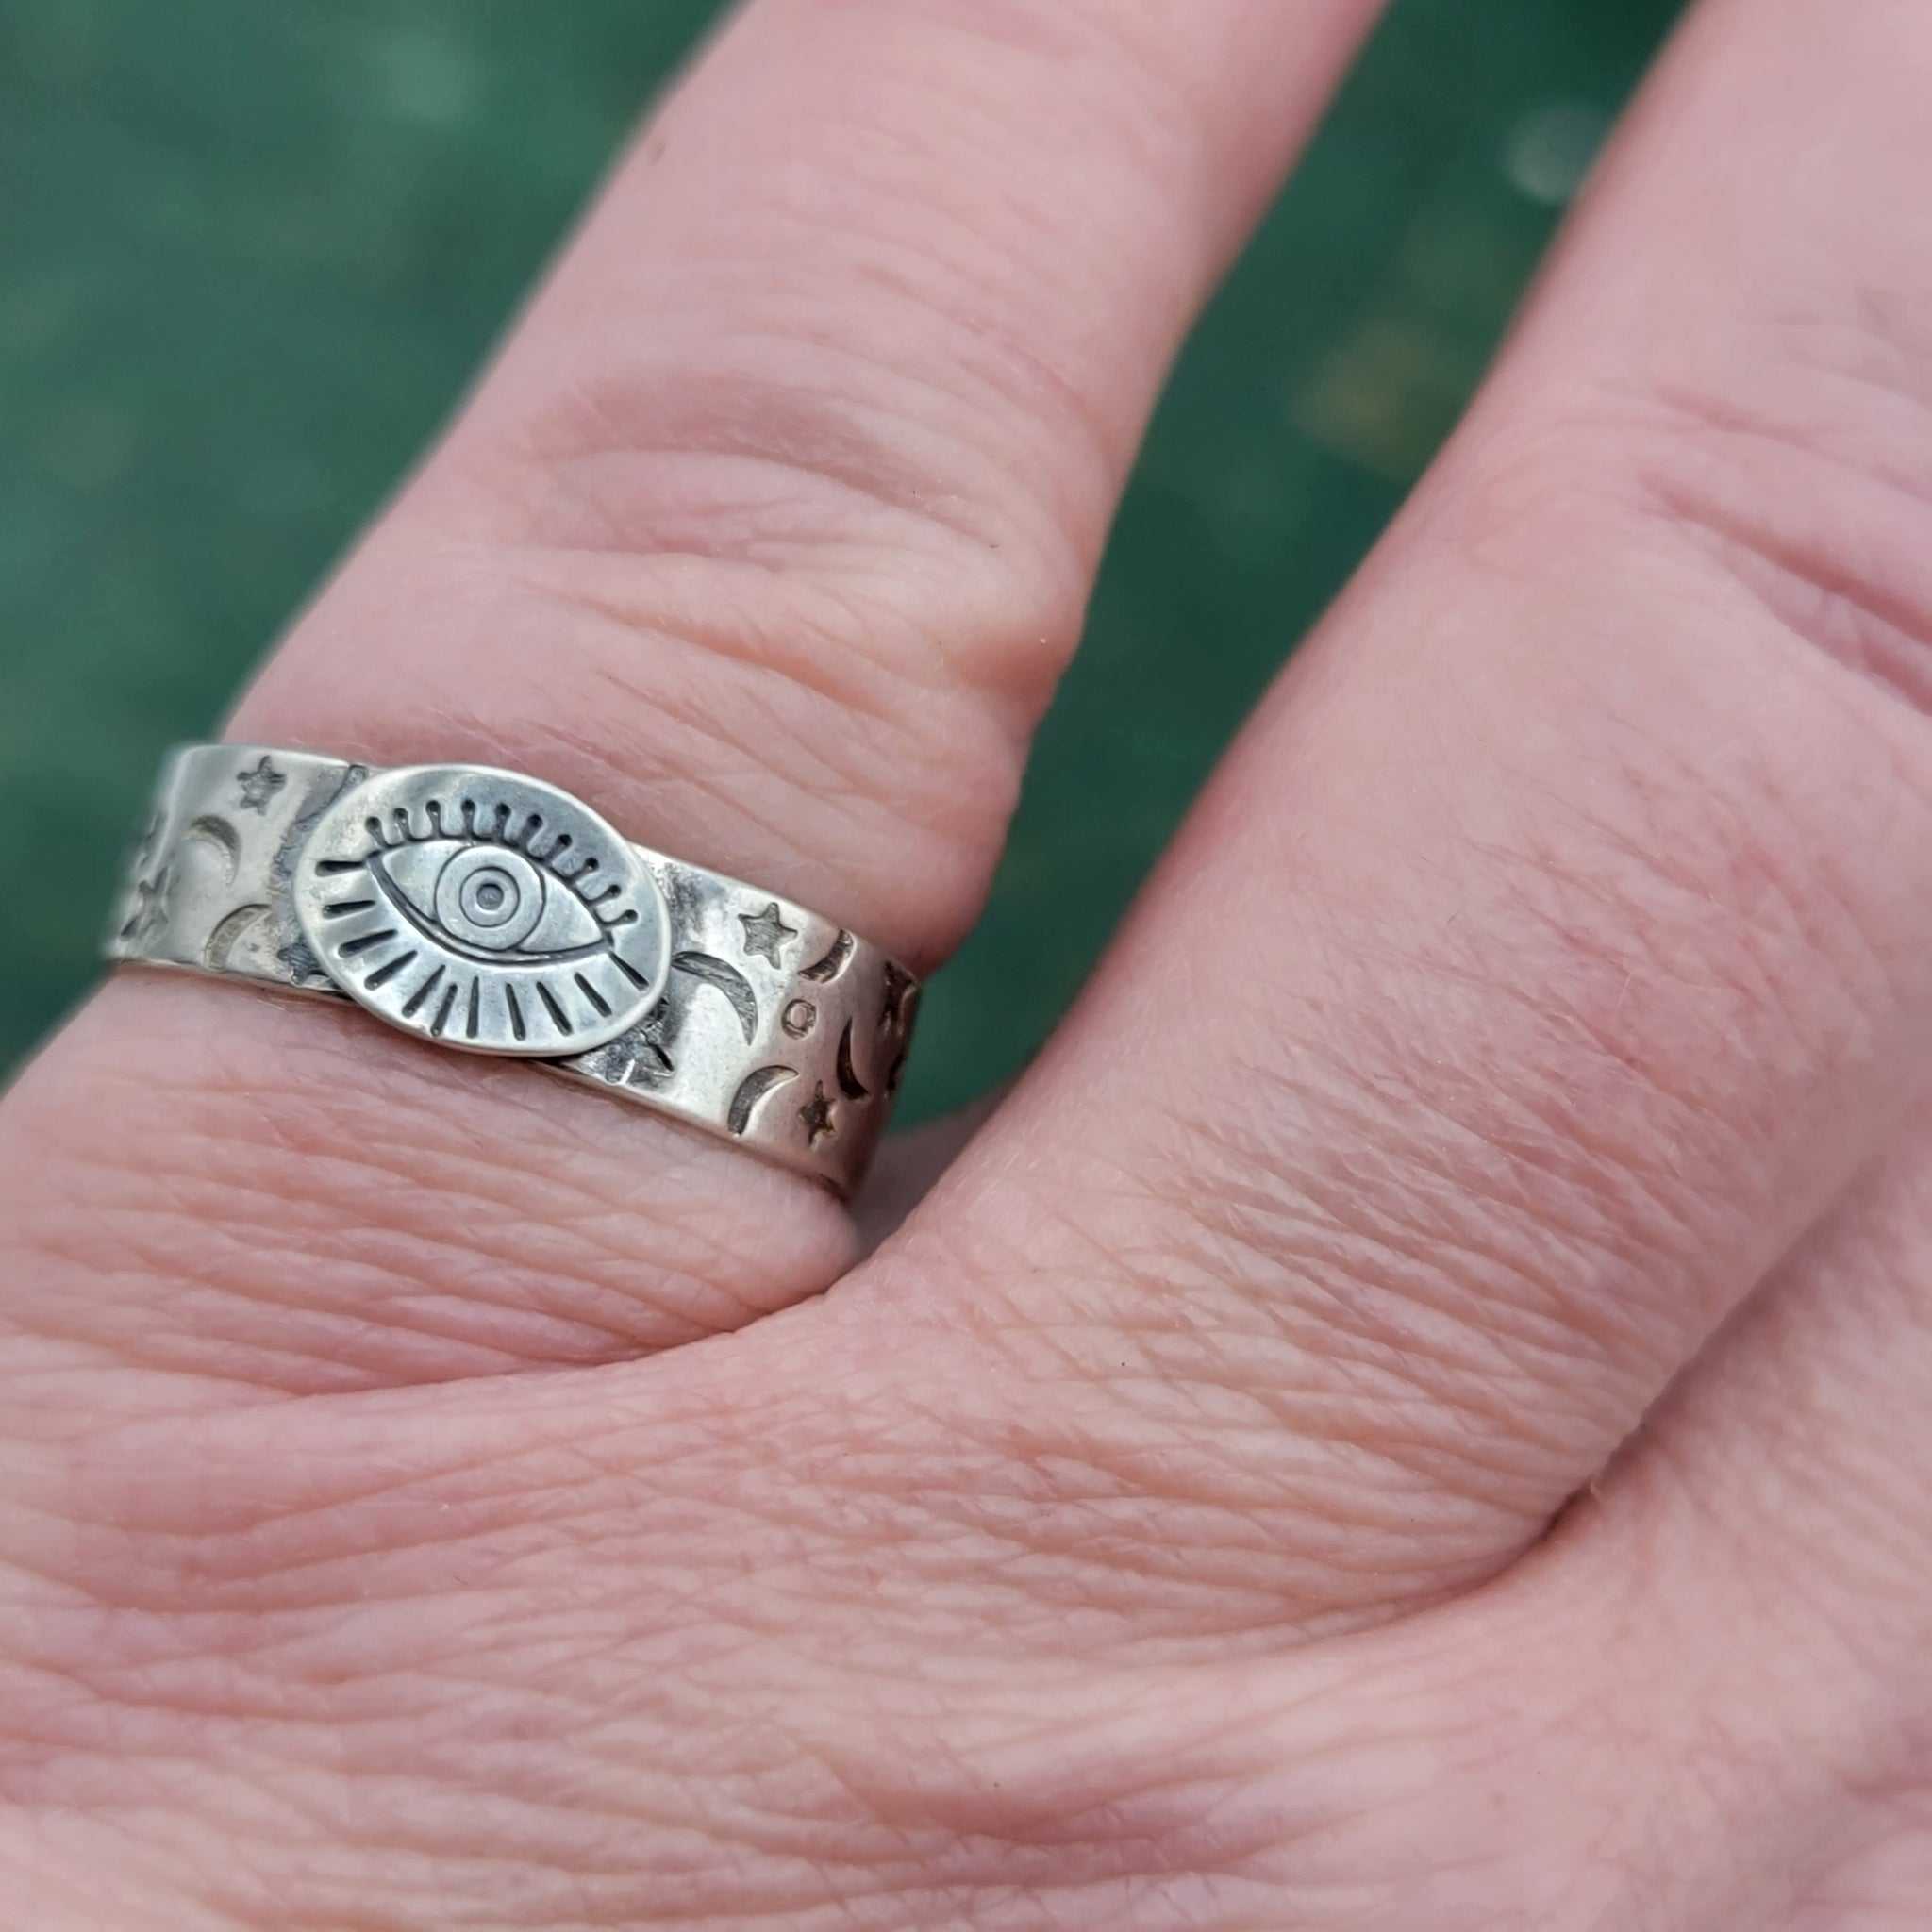 Evil Eye Ring | Local Eclectic – local eclectic